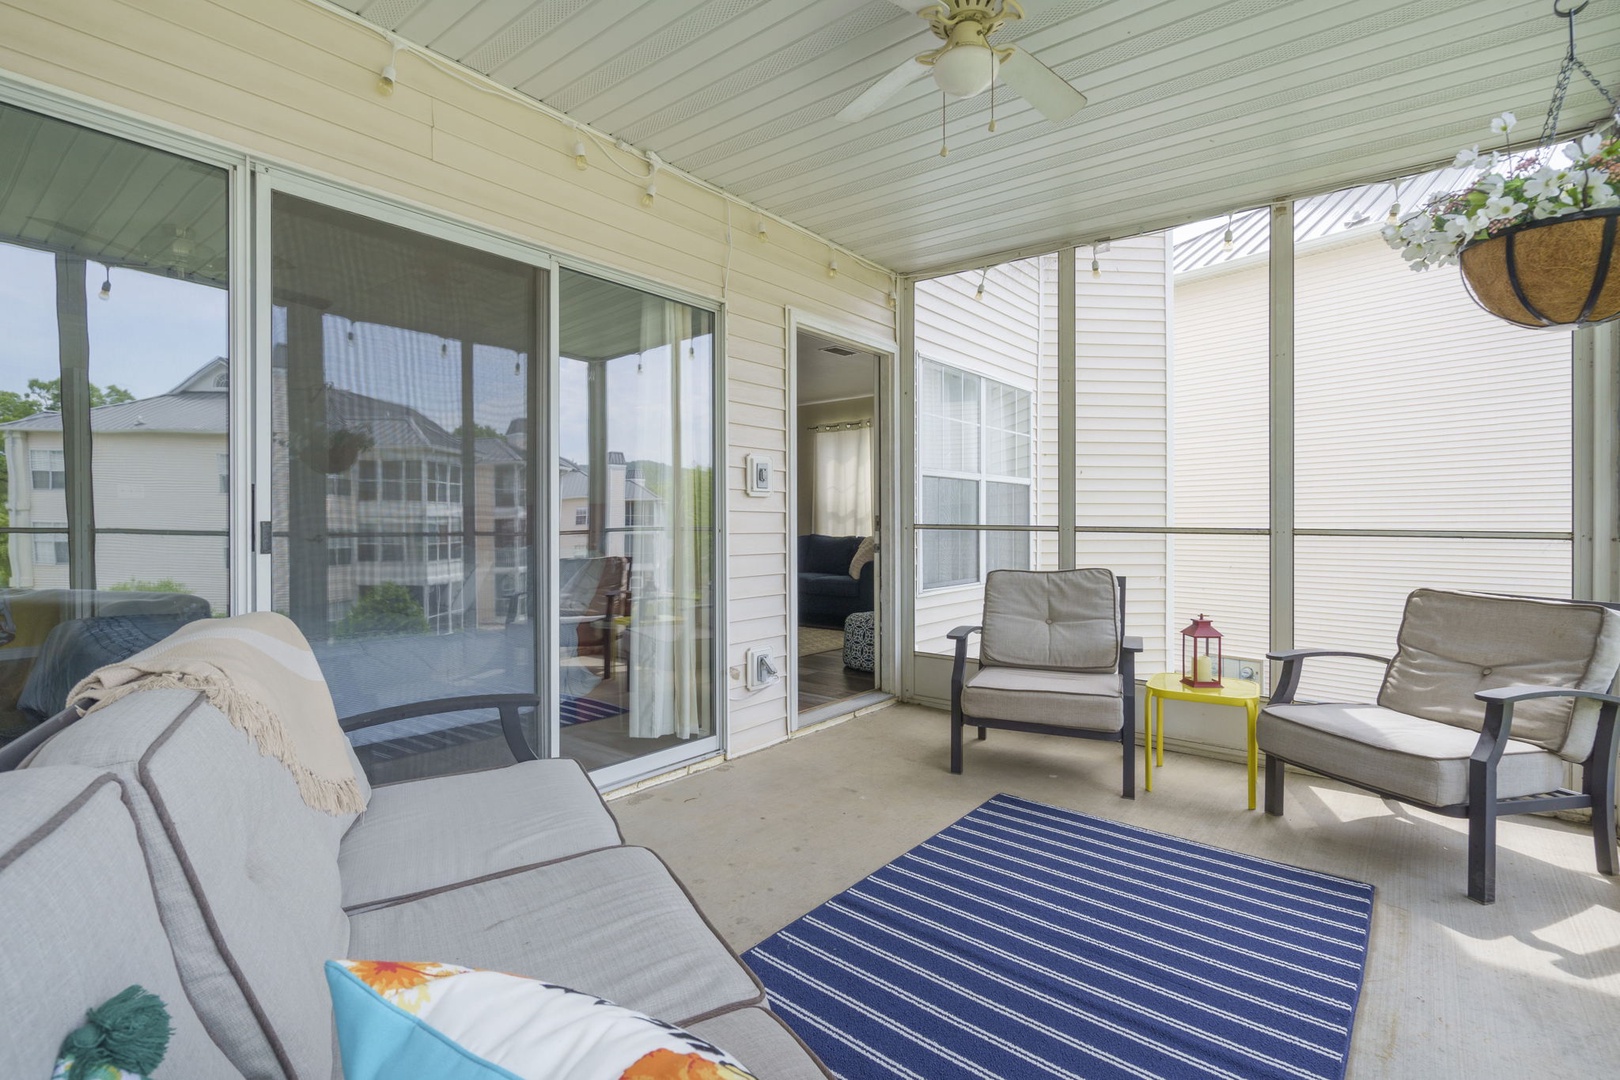 Relax outside on the enclosed porch